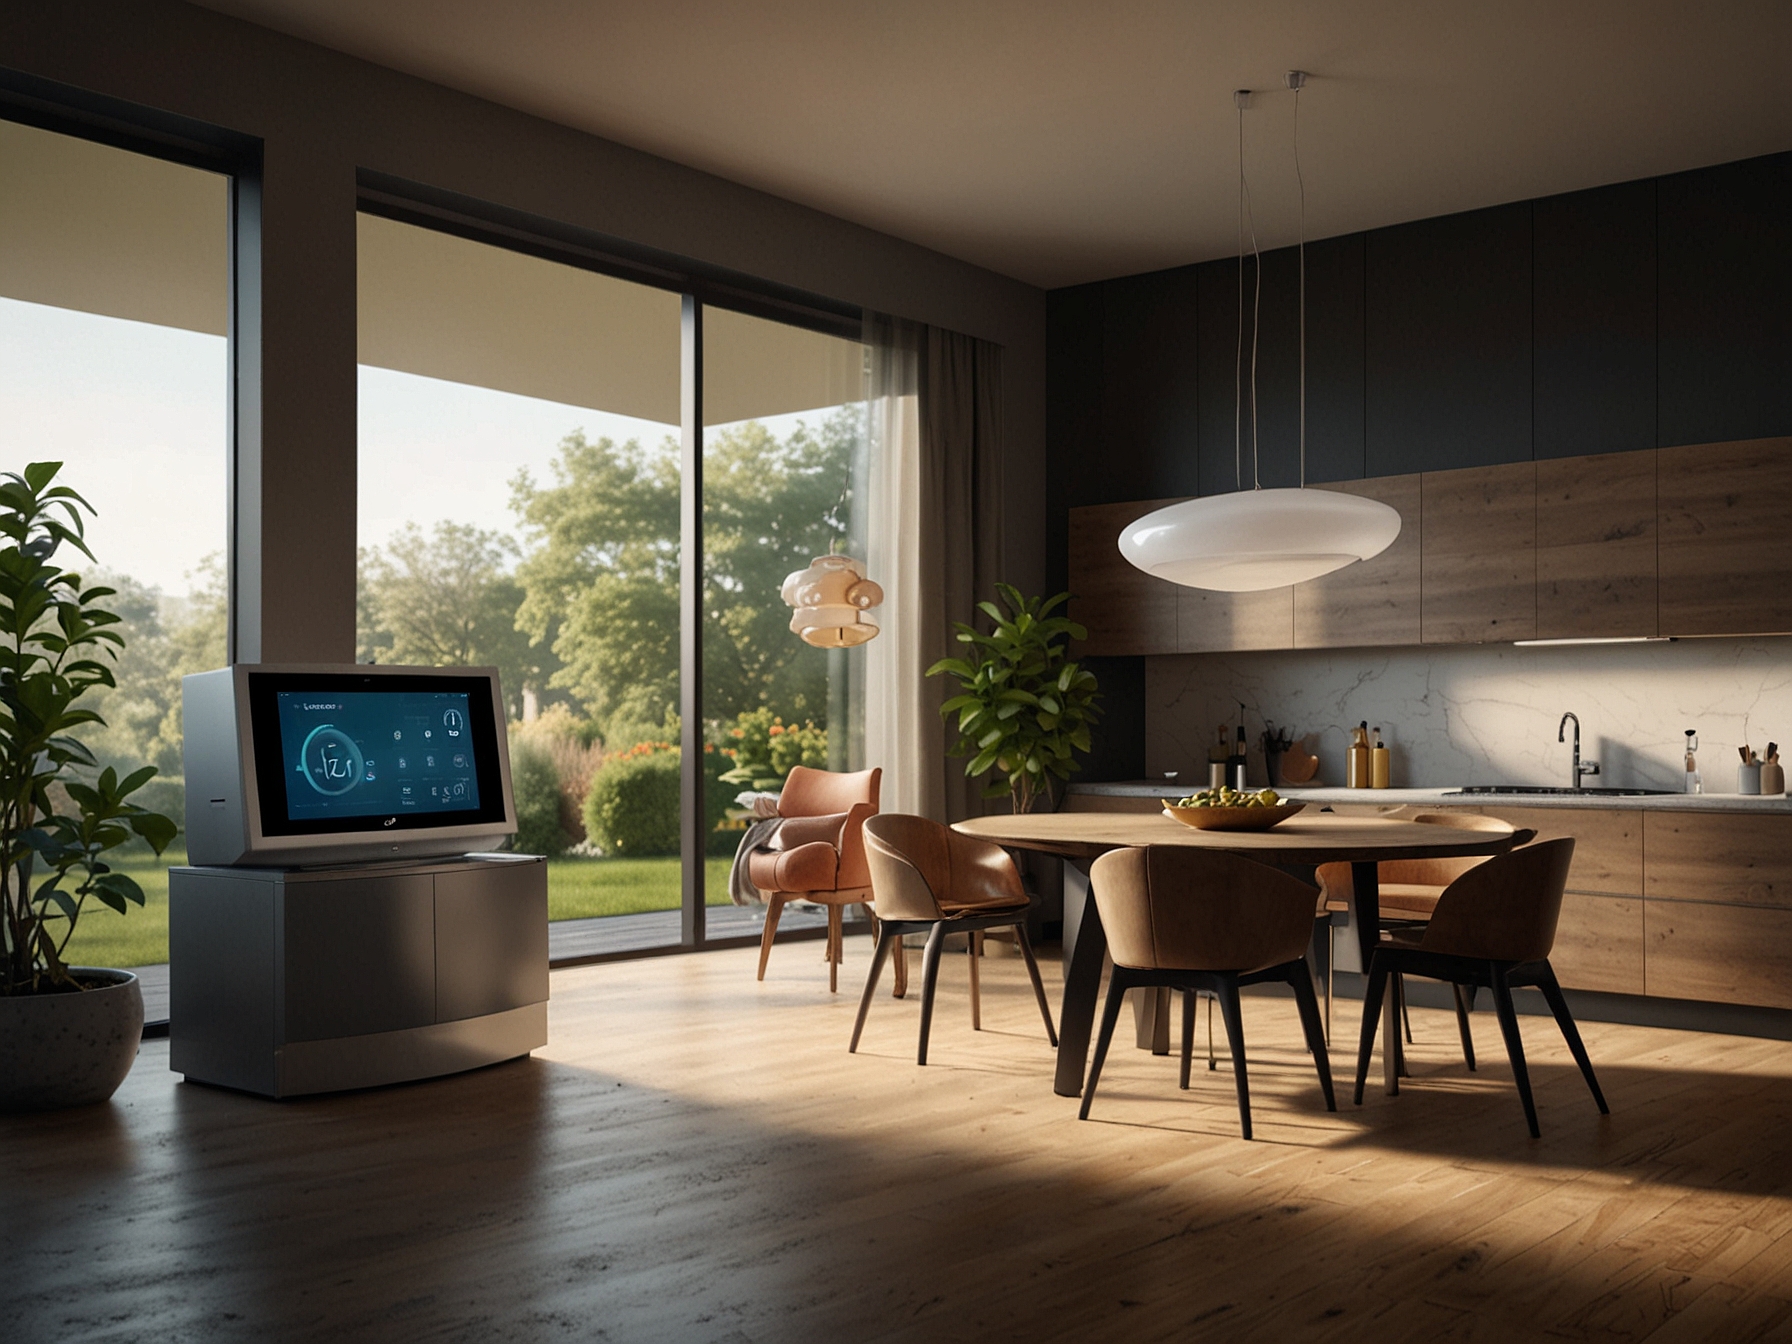 Whirlpool's innovative smart home technology and sustainability efforts, highlighting the company's commitment to connectivity, automation, and environmental responsibility.